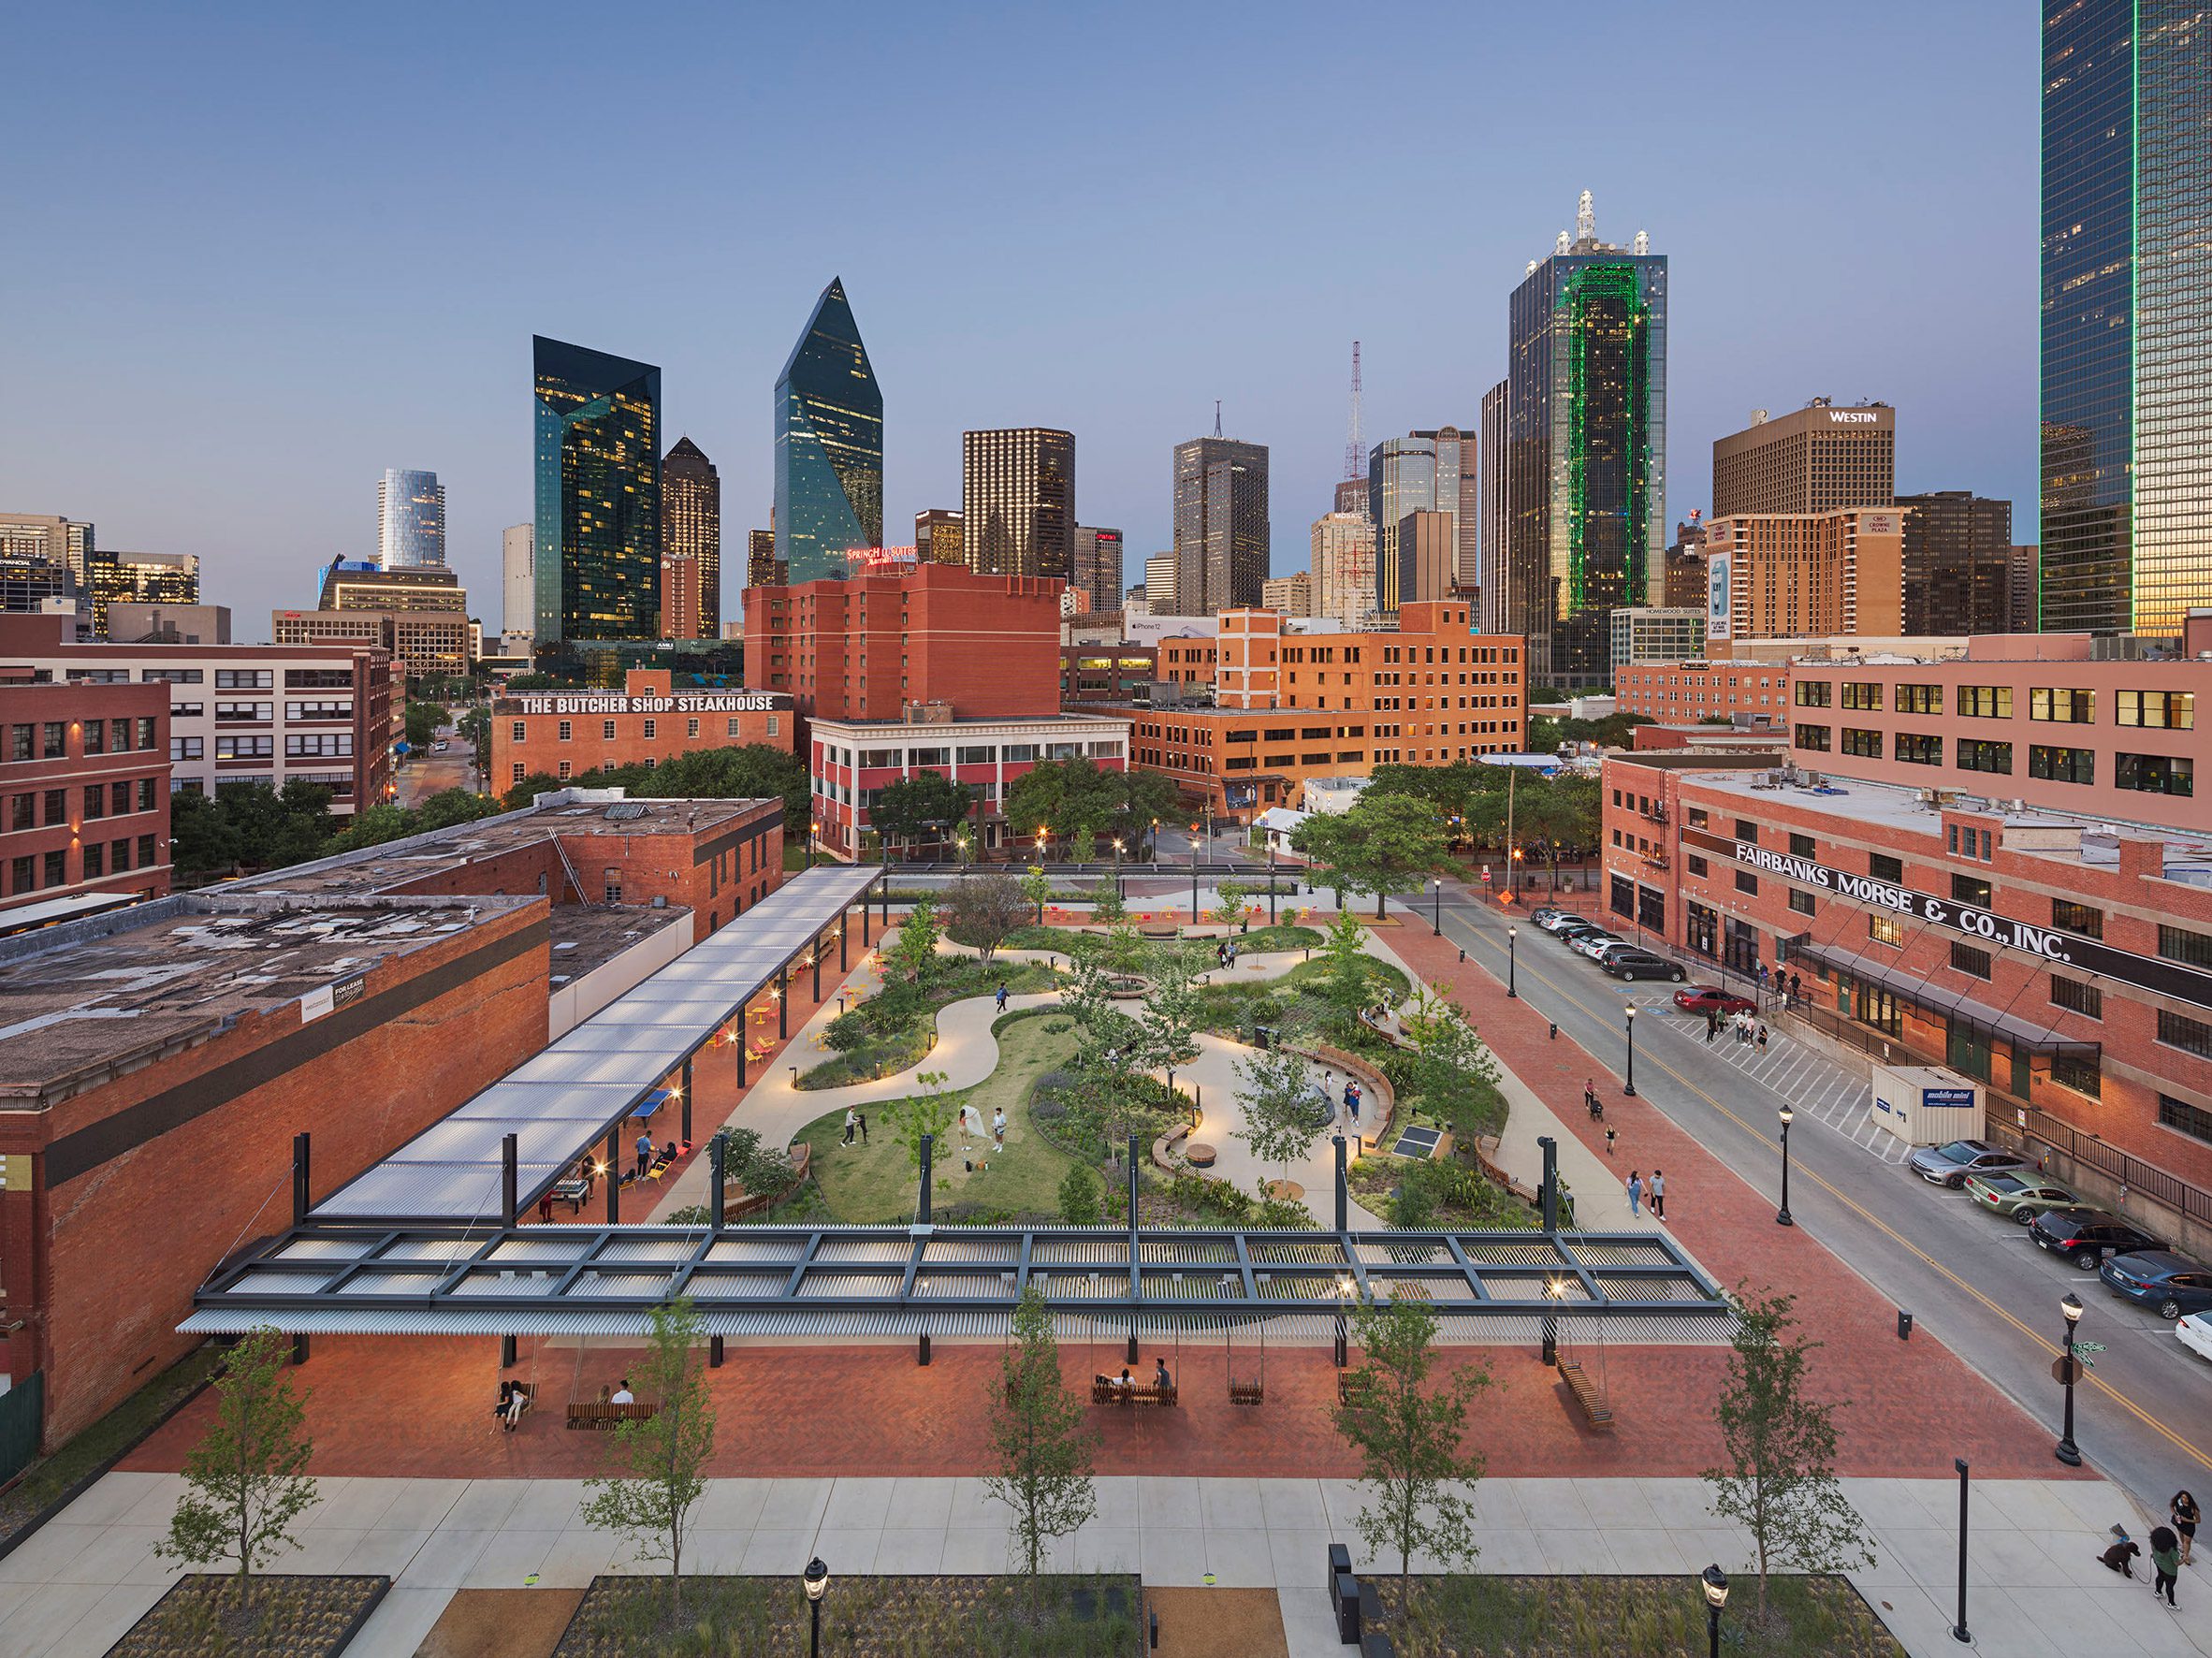 A former parking lot turned into a green open urban space